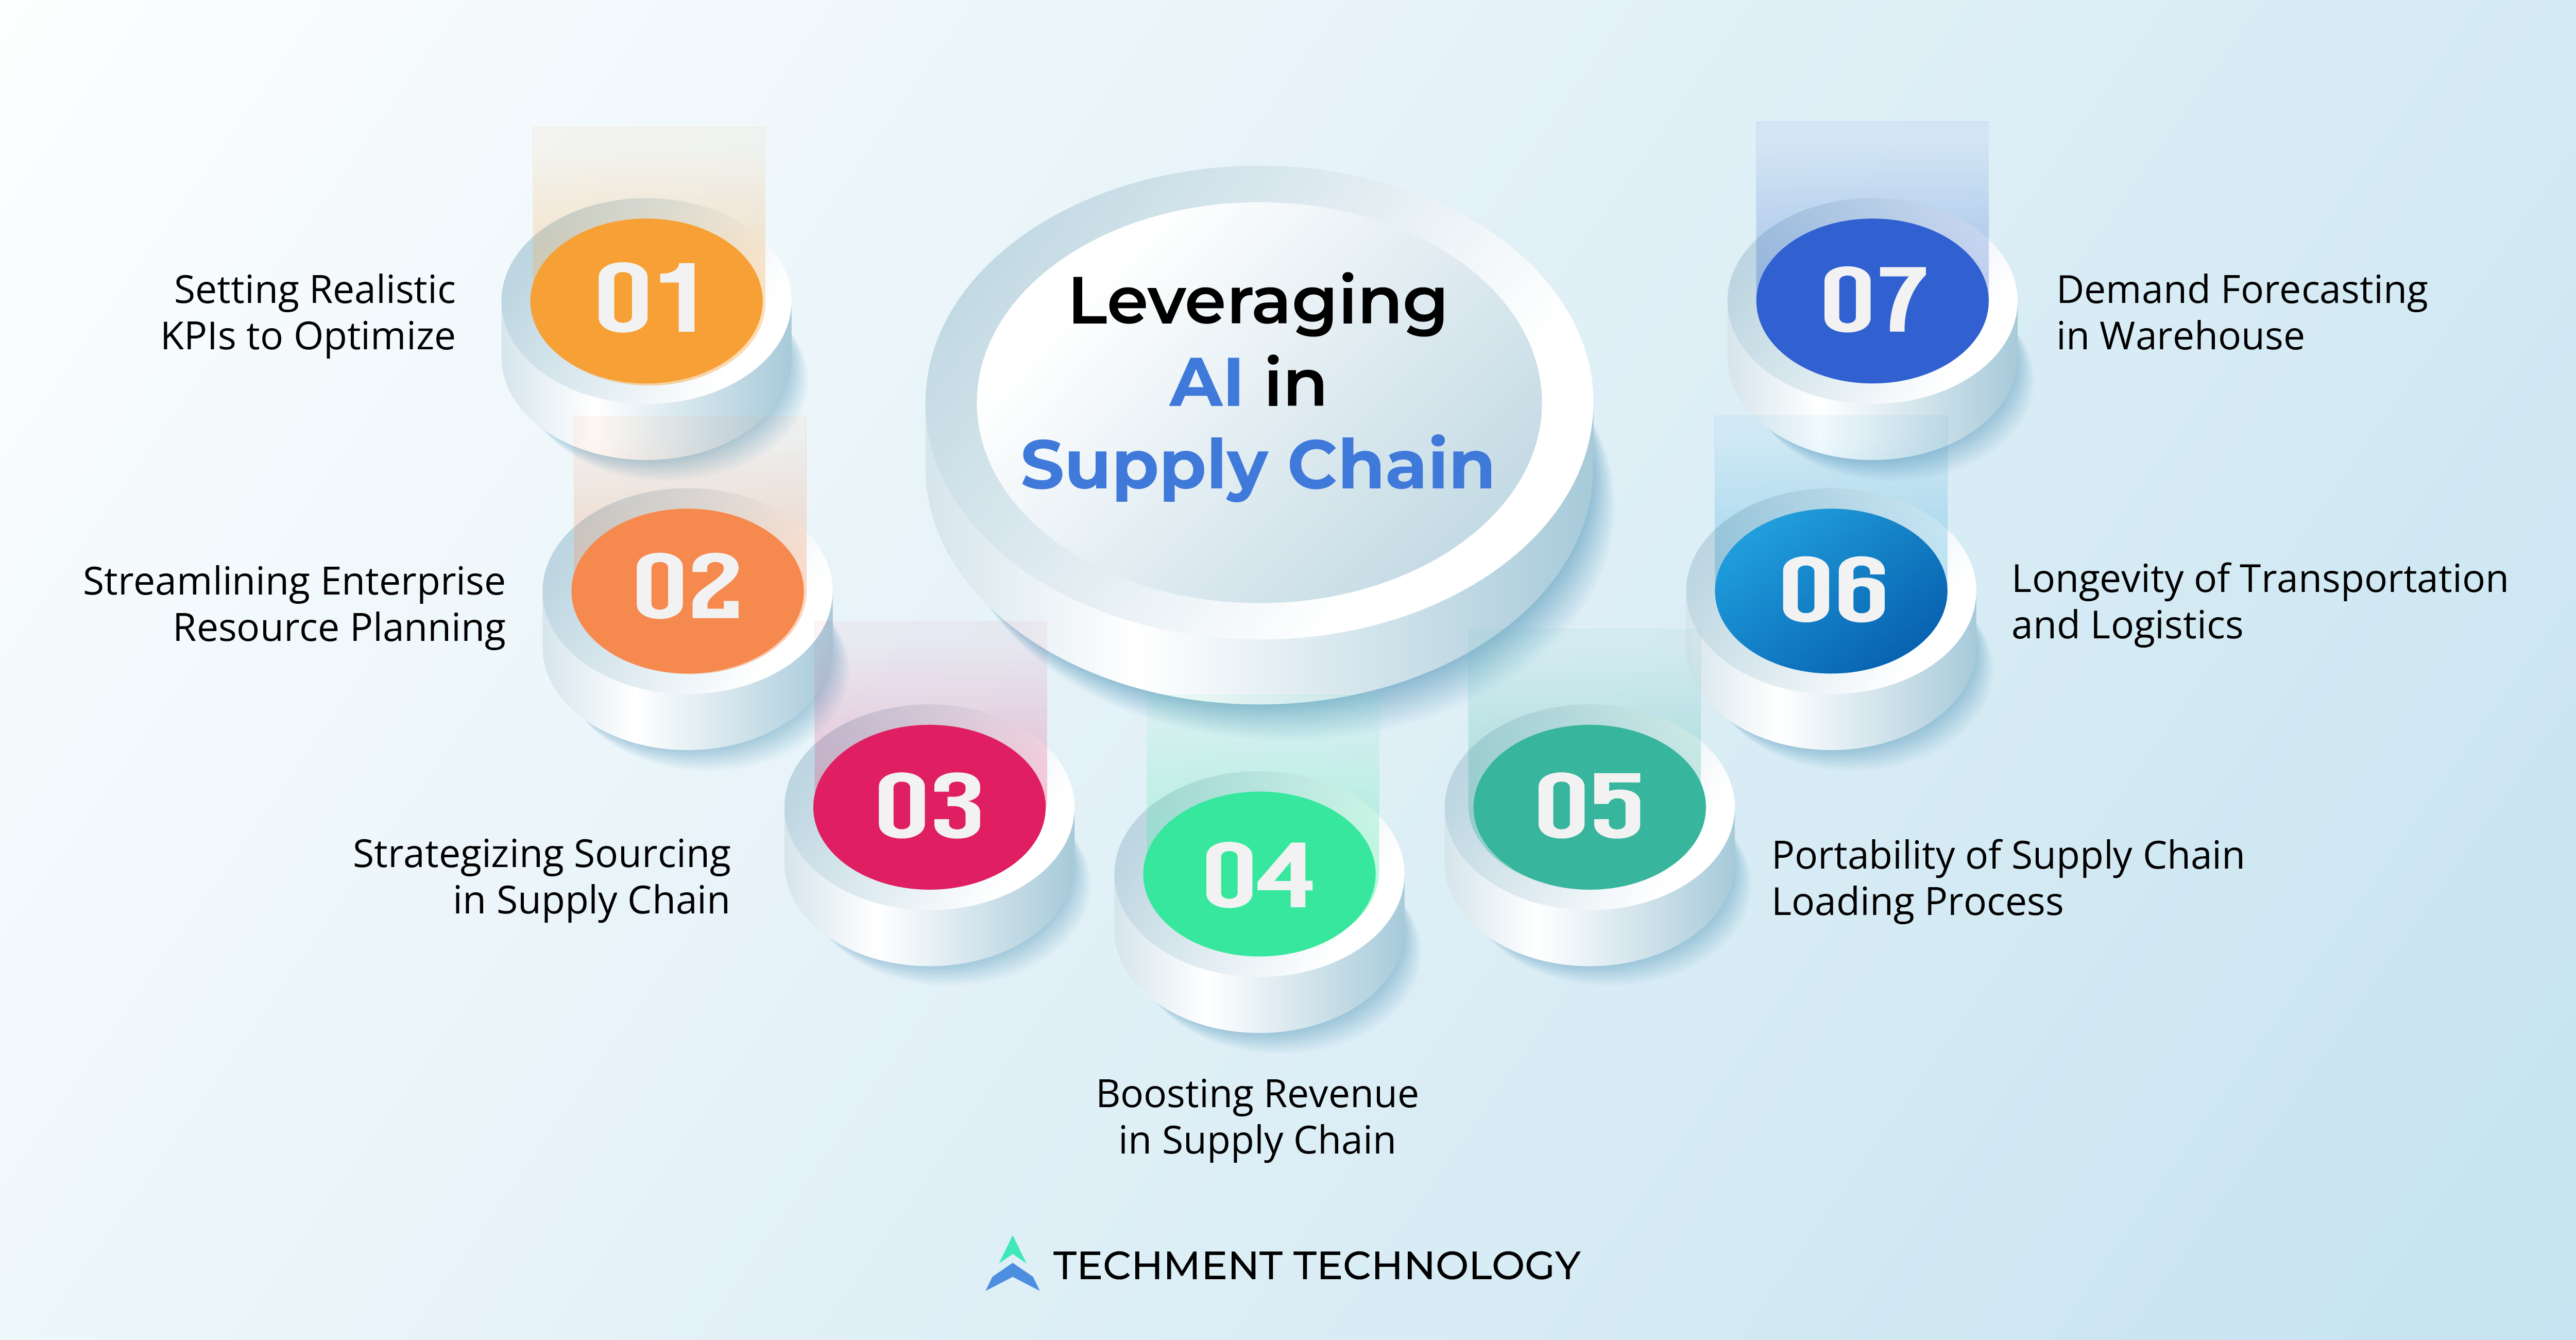 Leveraging AI in Supply Chain